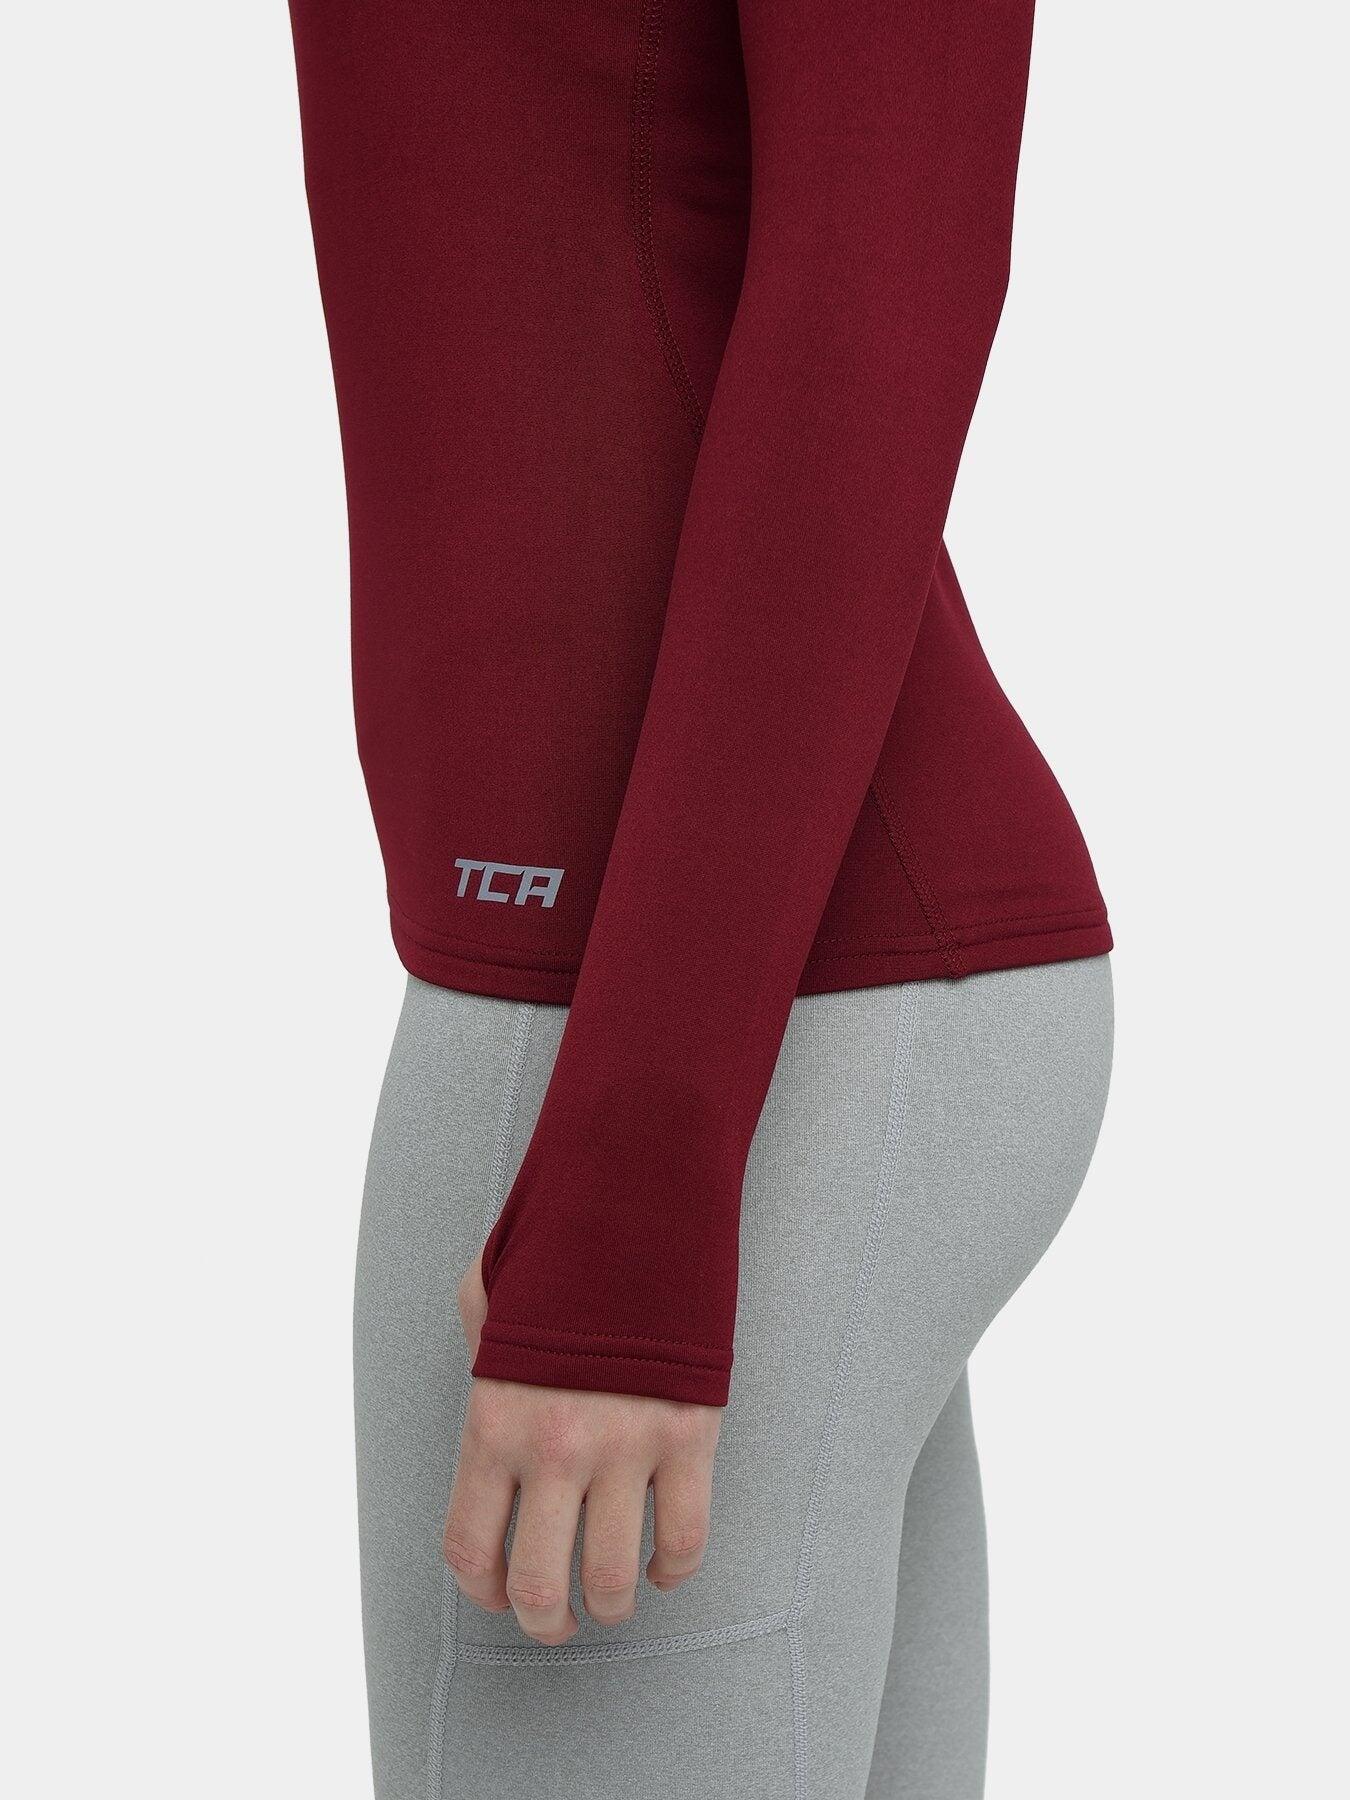 Women's Thermal Funnel Neck Top - Cabernet 4/5